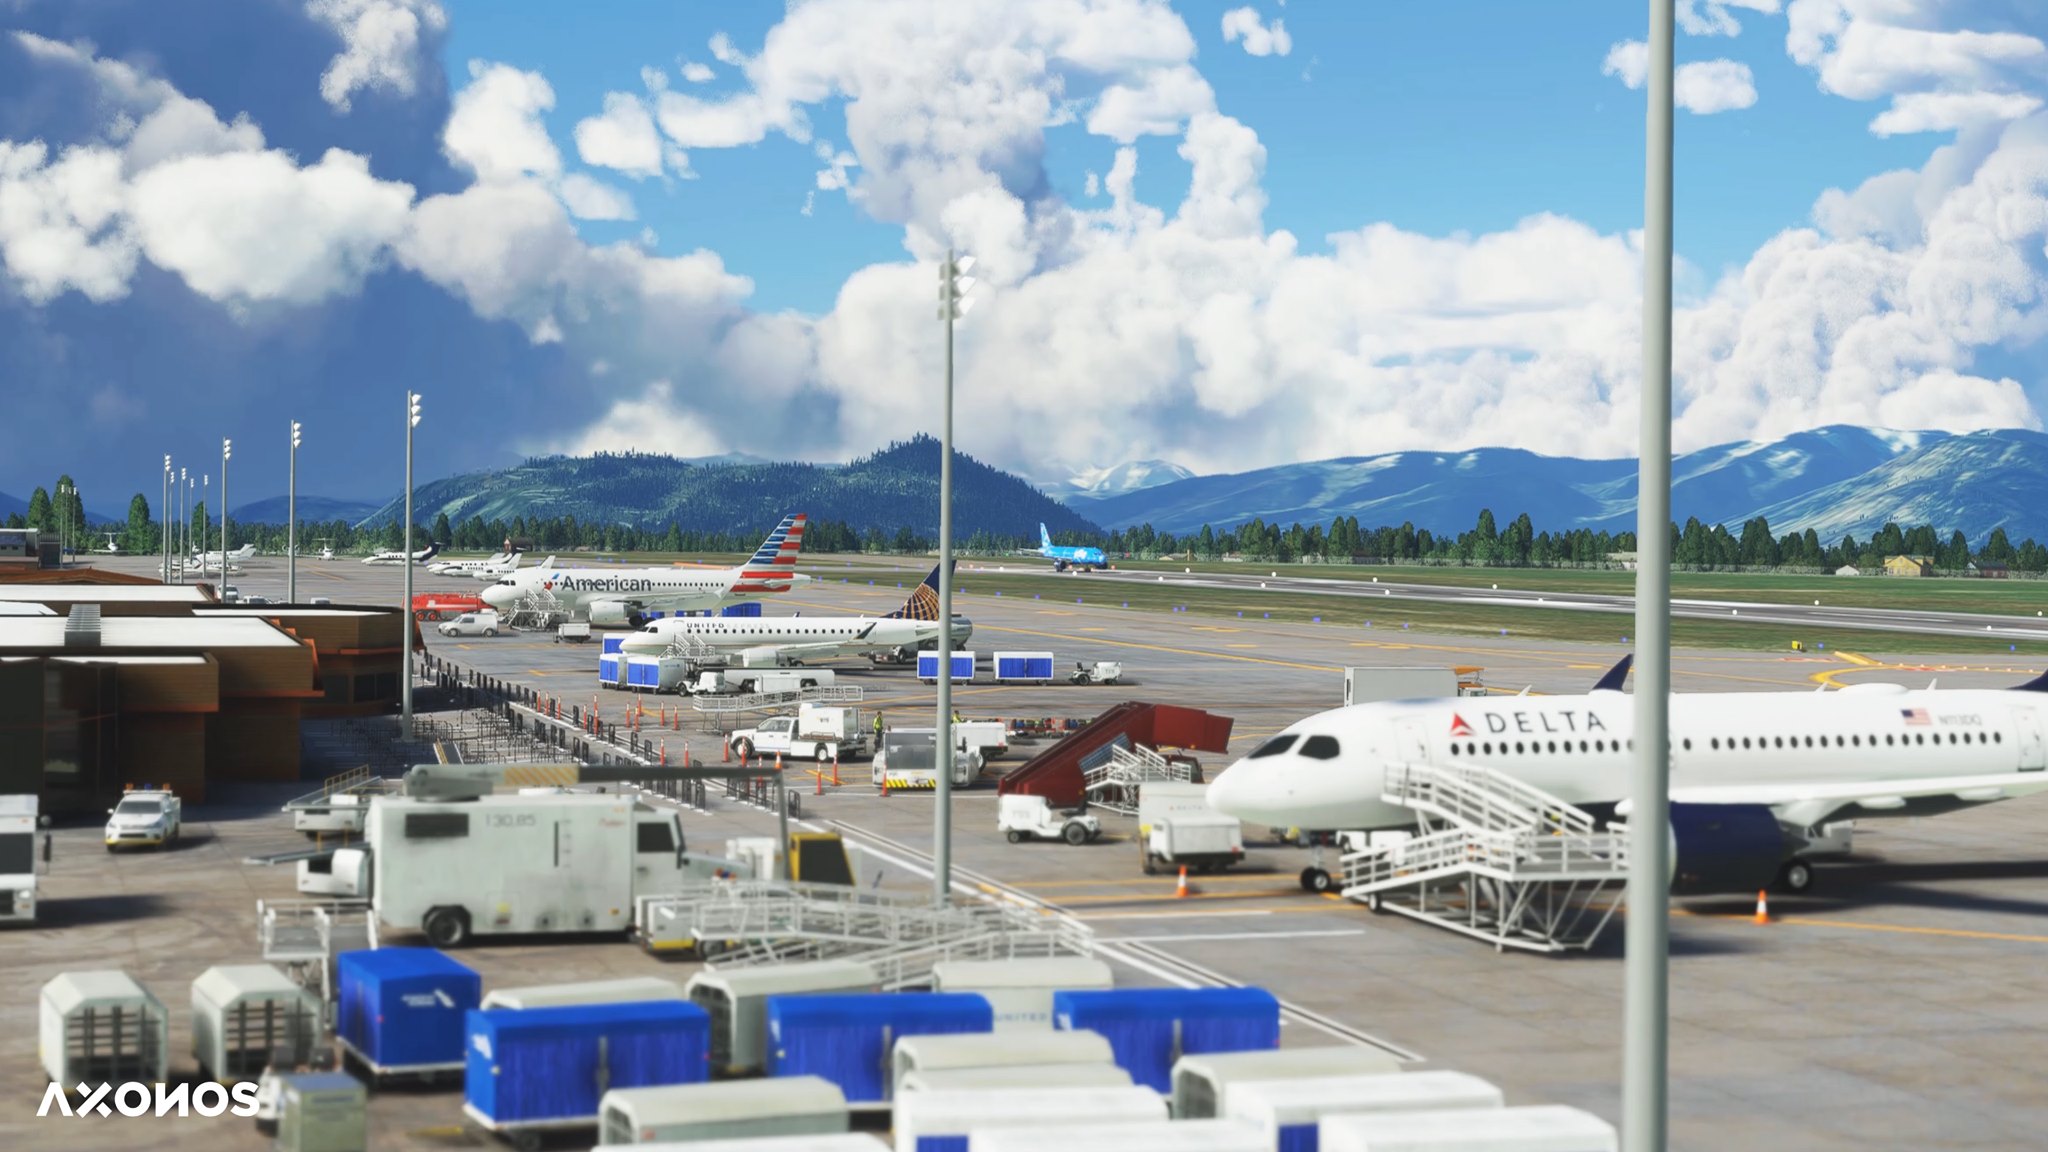 Axonos Releases Jackson Hole for Microsoft Flight Simulator - Axonos, Microsoft Flight Simulator